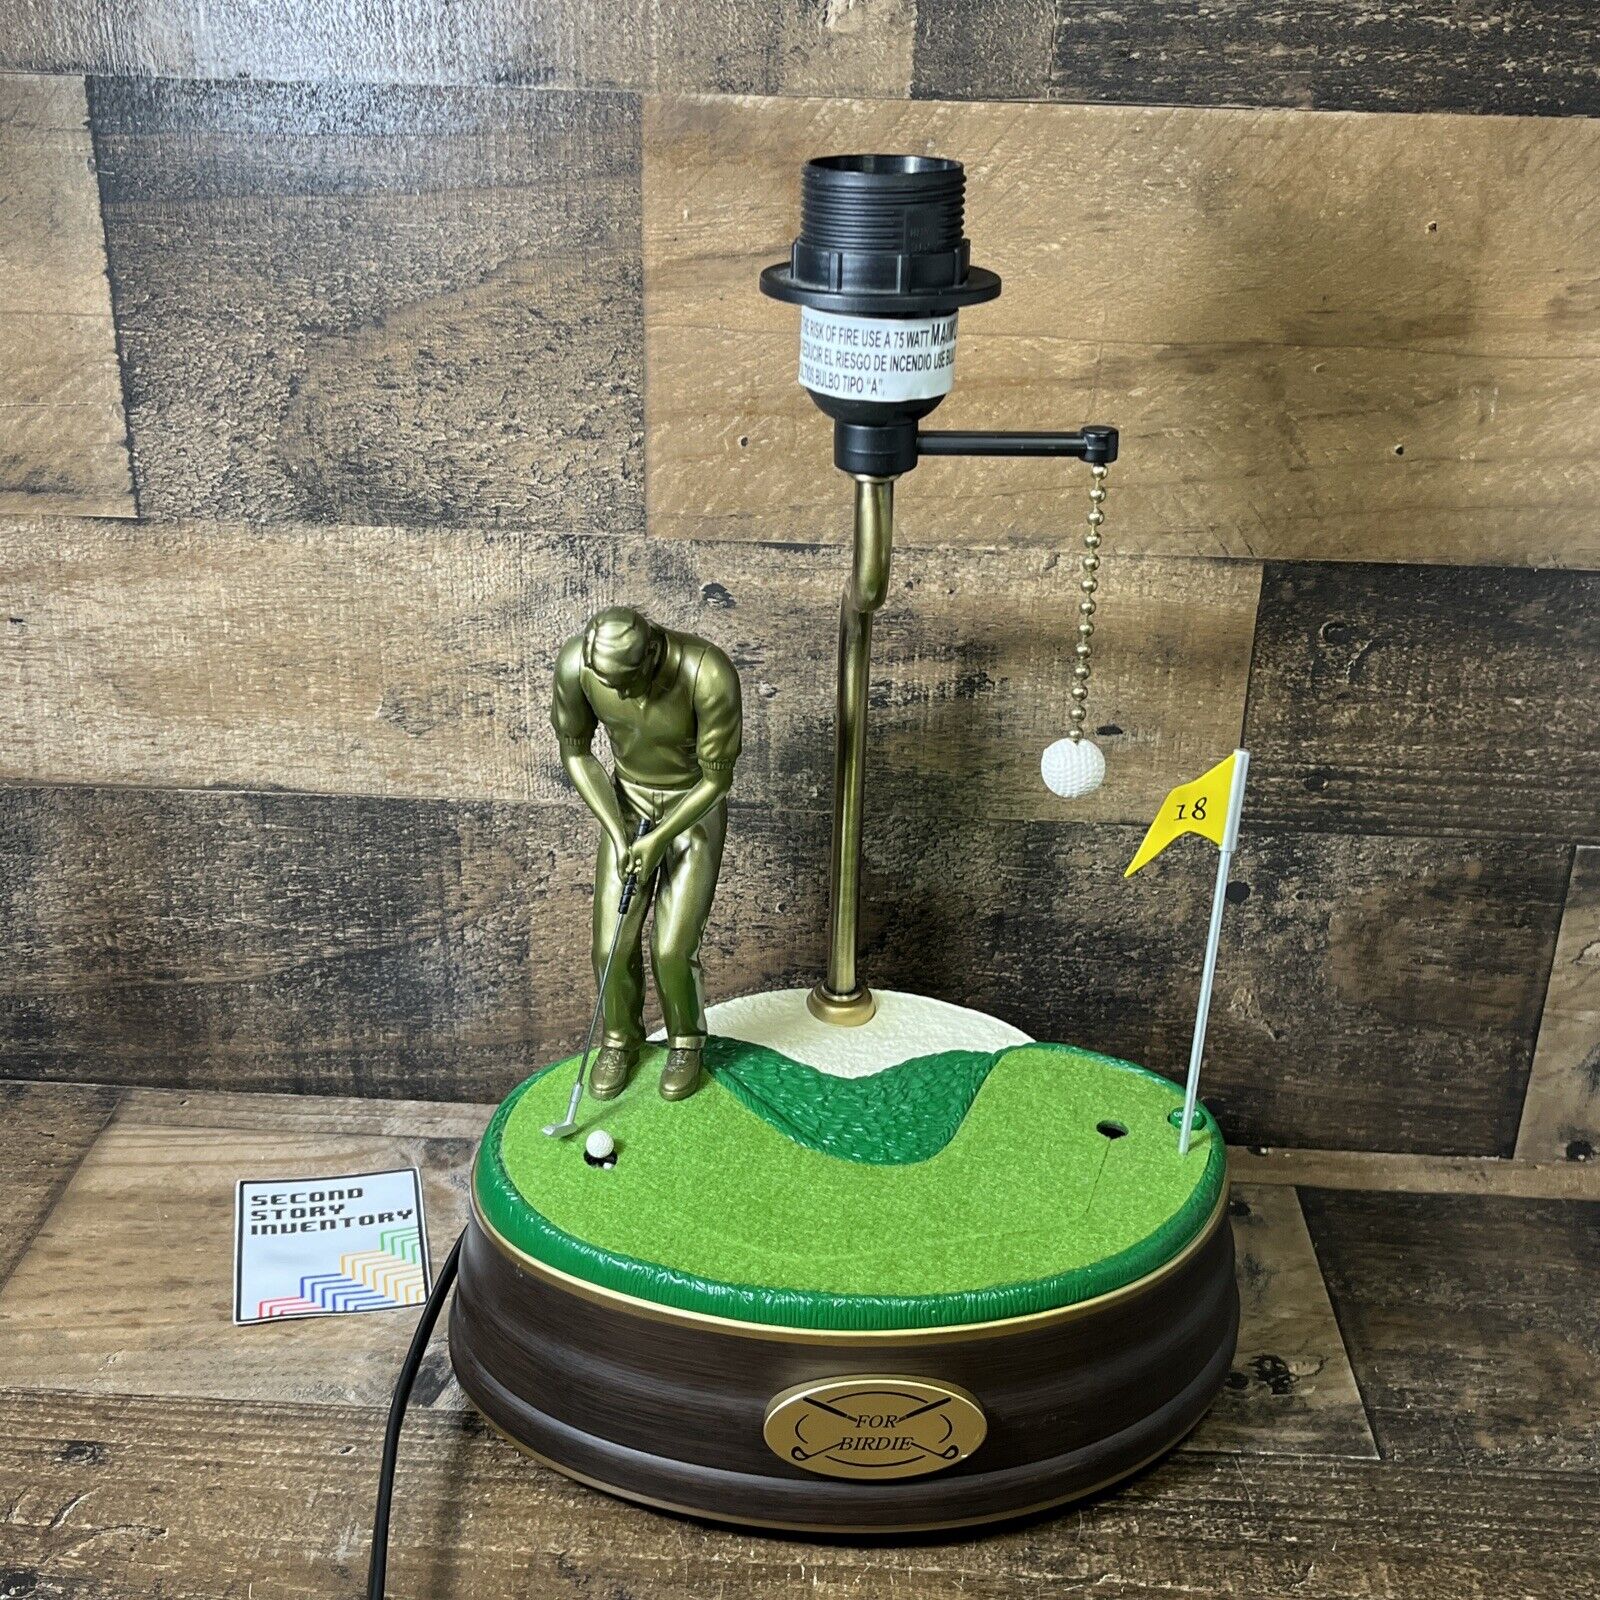 King America Golf Lamp For Birdie Animated Animation And Sound Works - No Shade